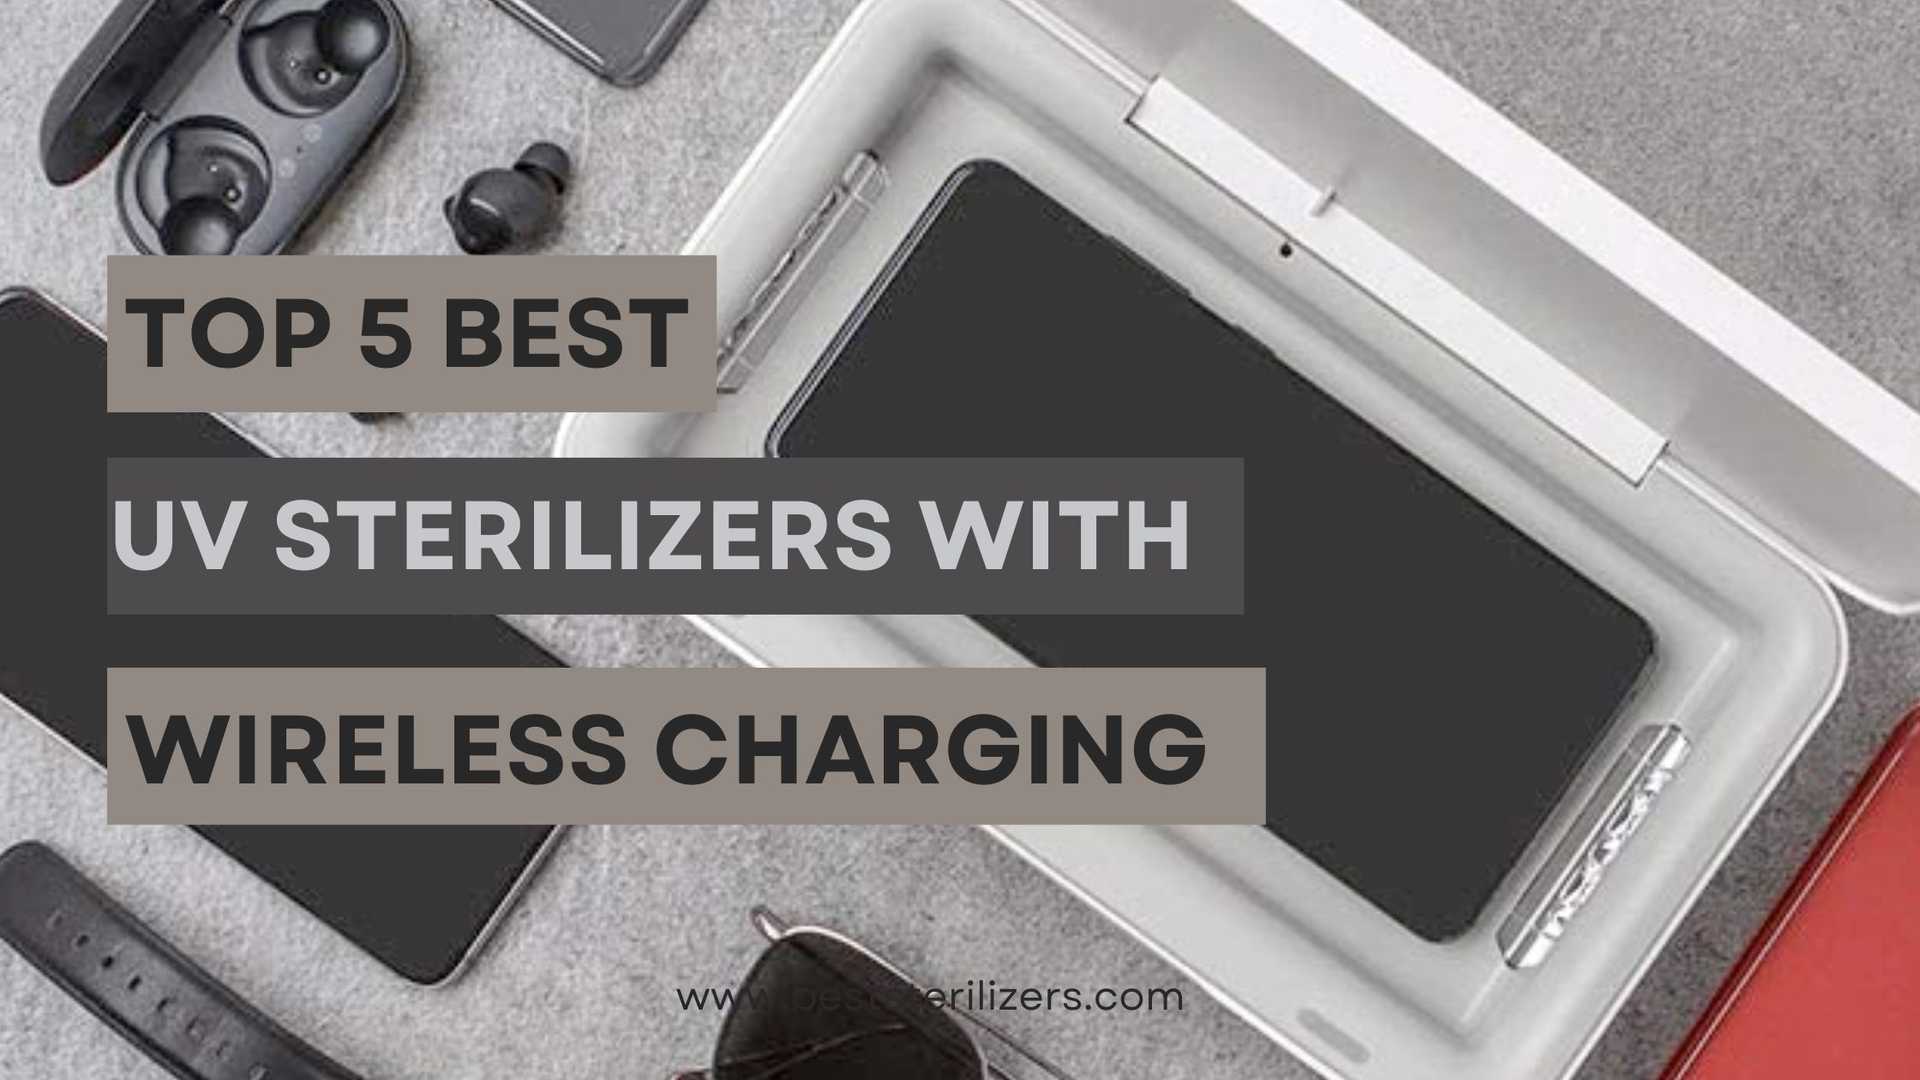 Top 5 Best UV Sterilizers with Wireless Charging in 2023